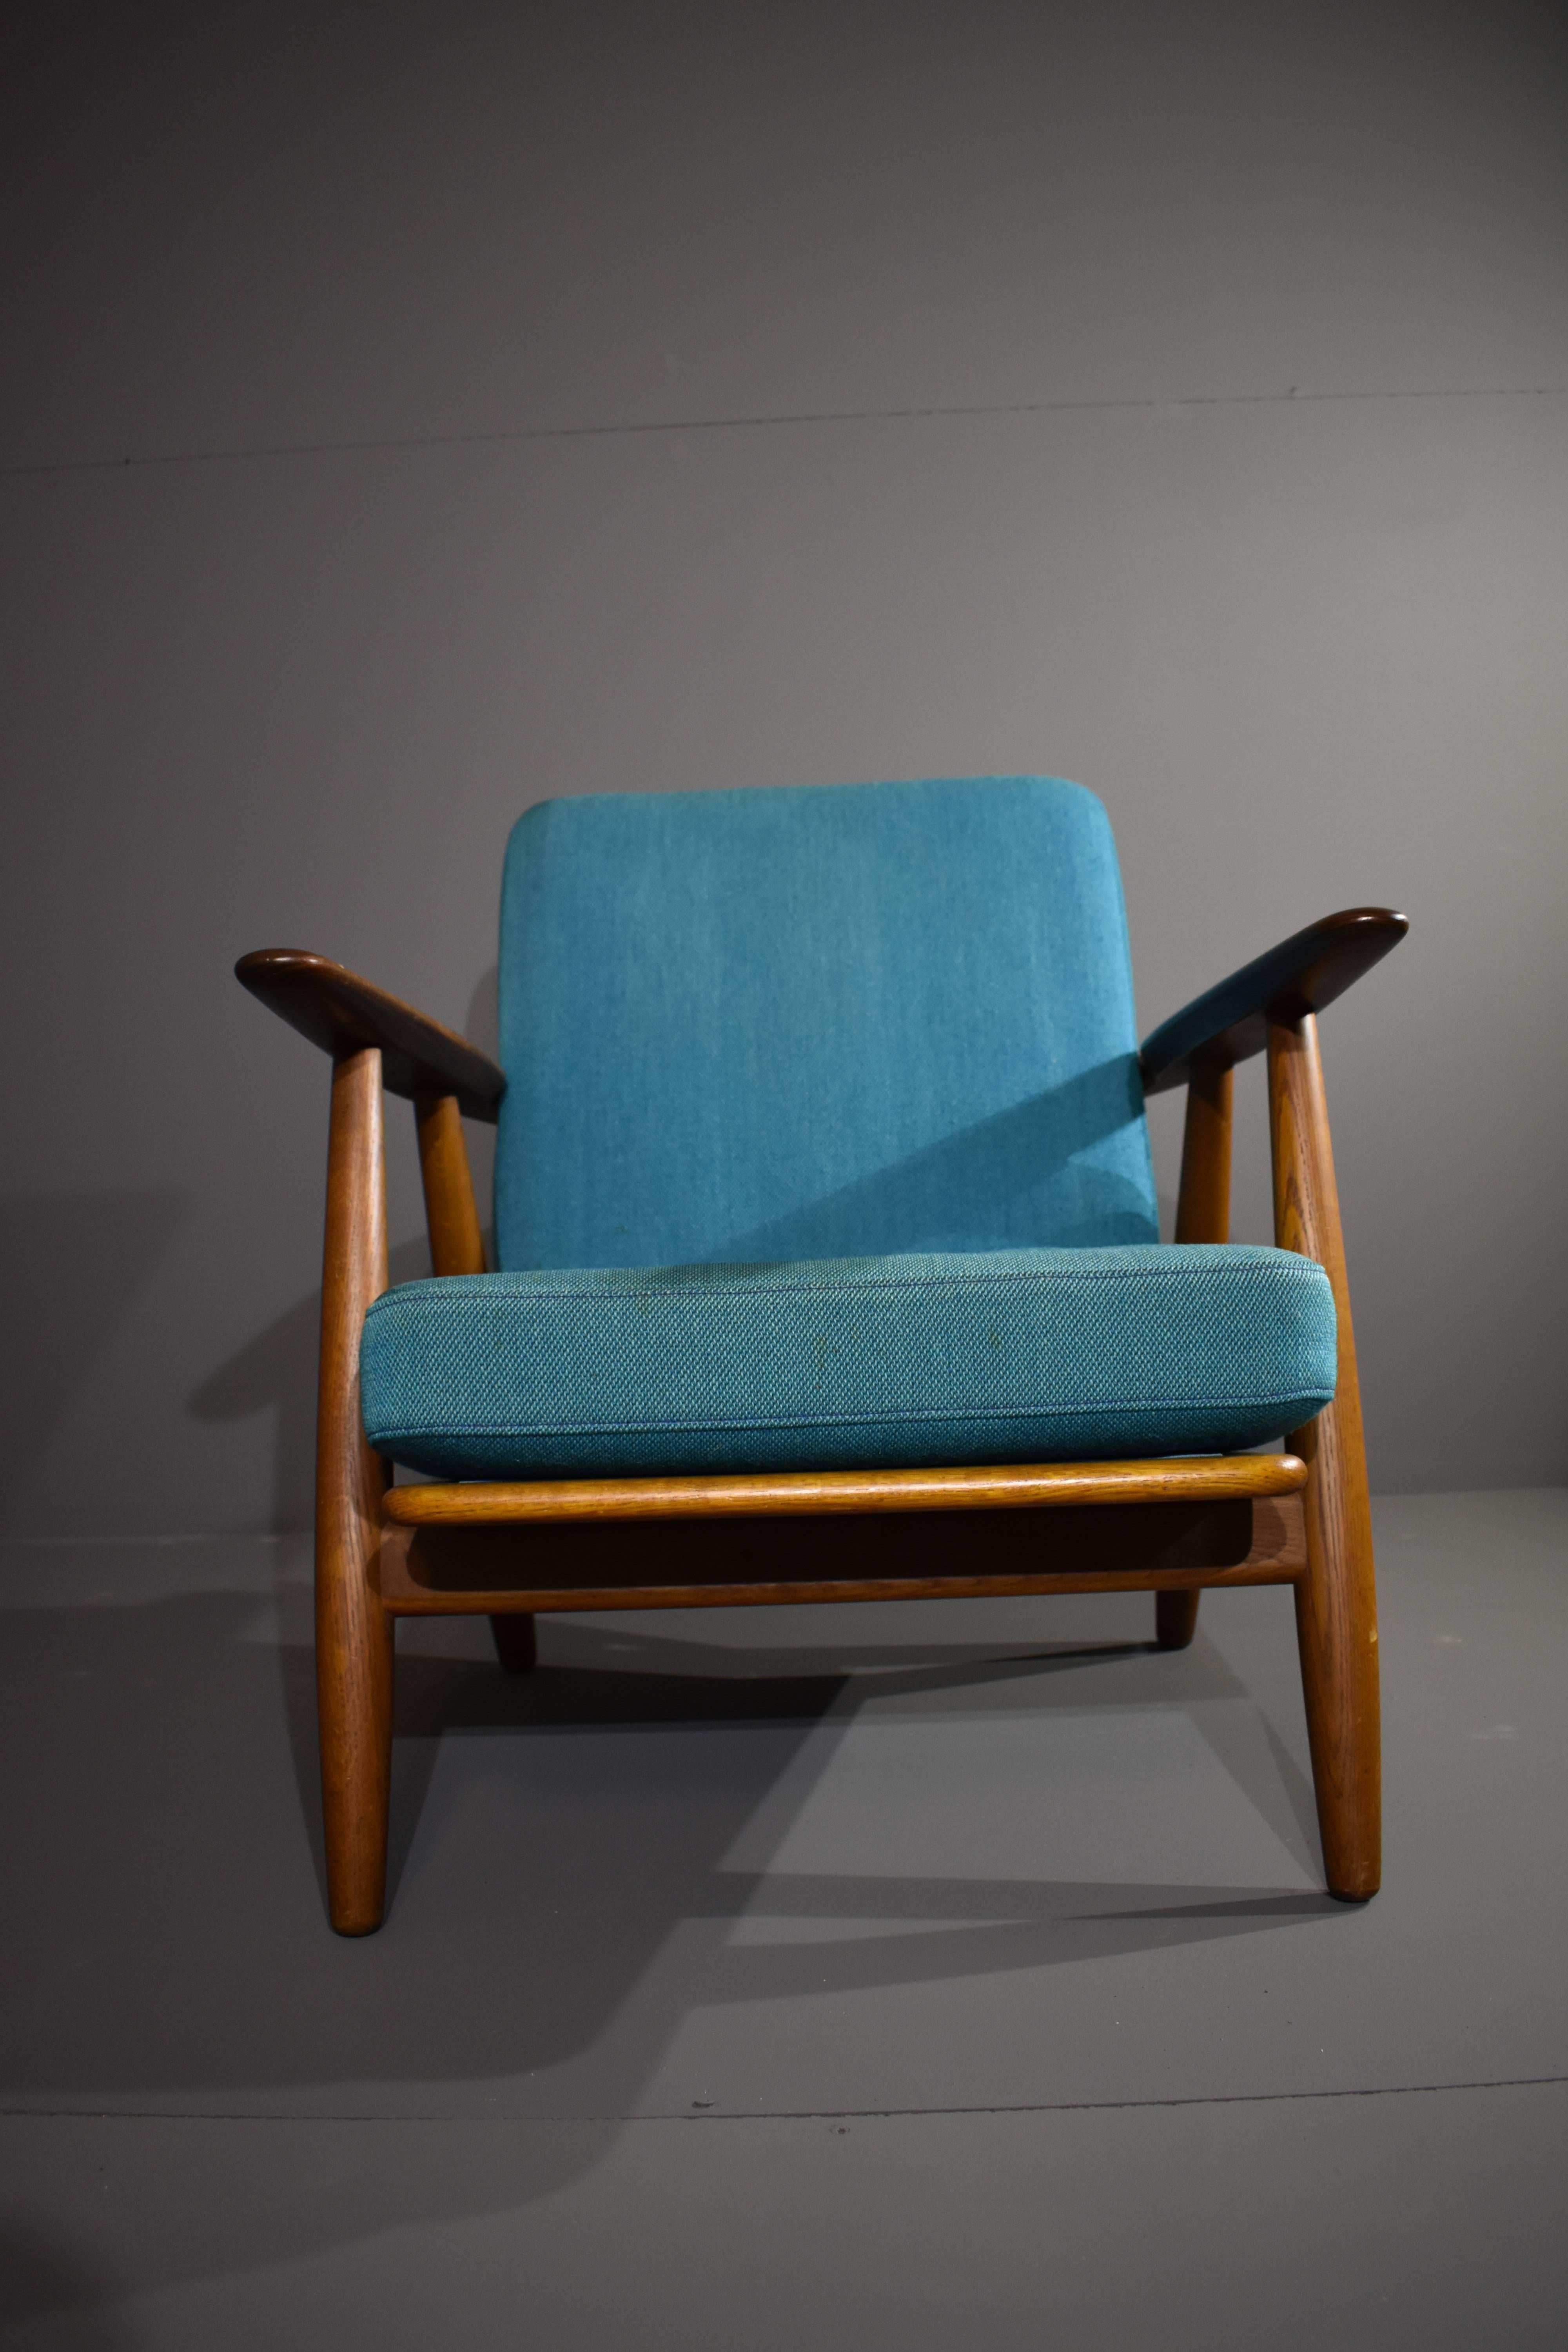 Hans J. Wegner's GE-240 in solid teak, with blue fabric upholstery.